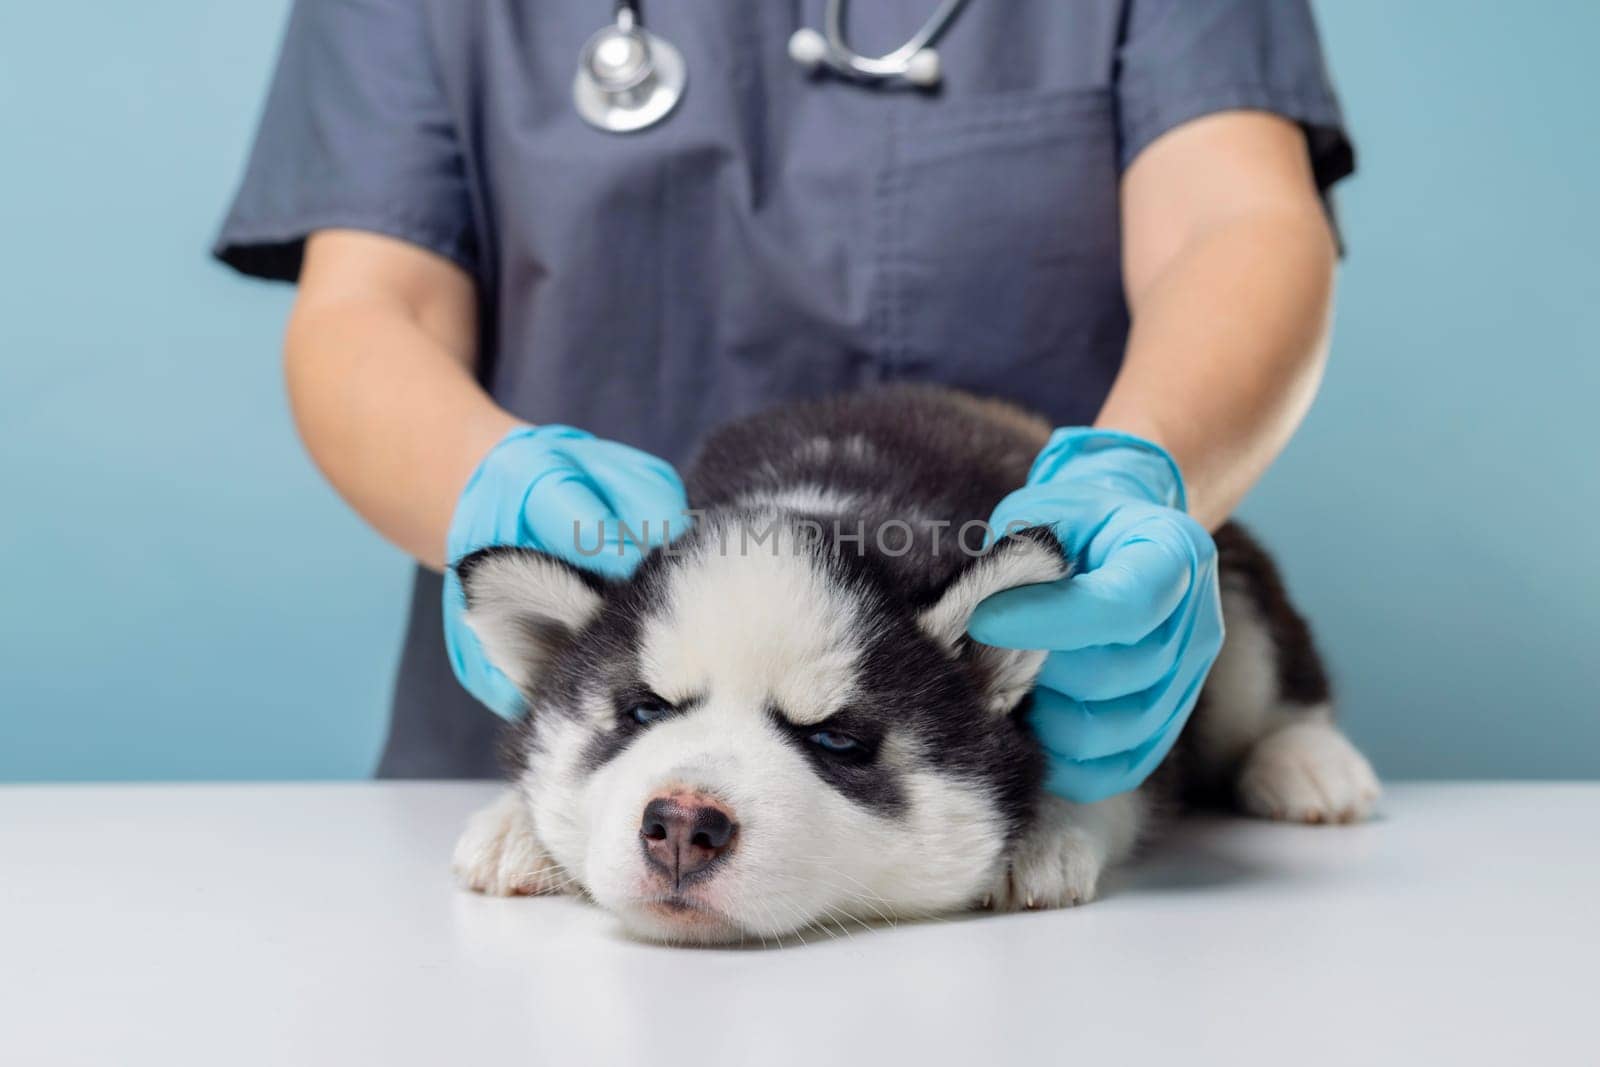 Husky puppy being examined by veterinarian, clinic interior. Professional pet healthcare photography for design.